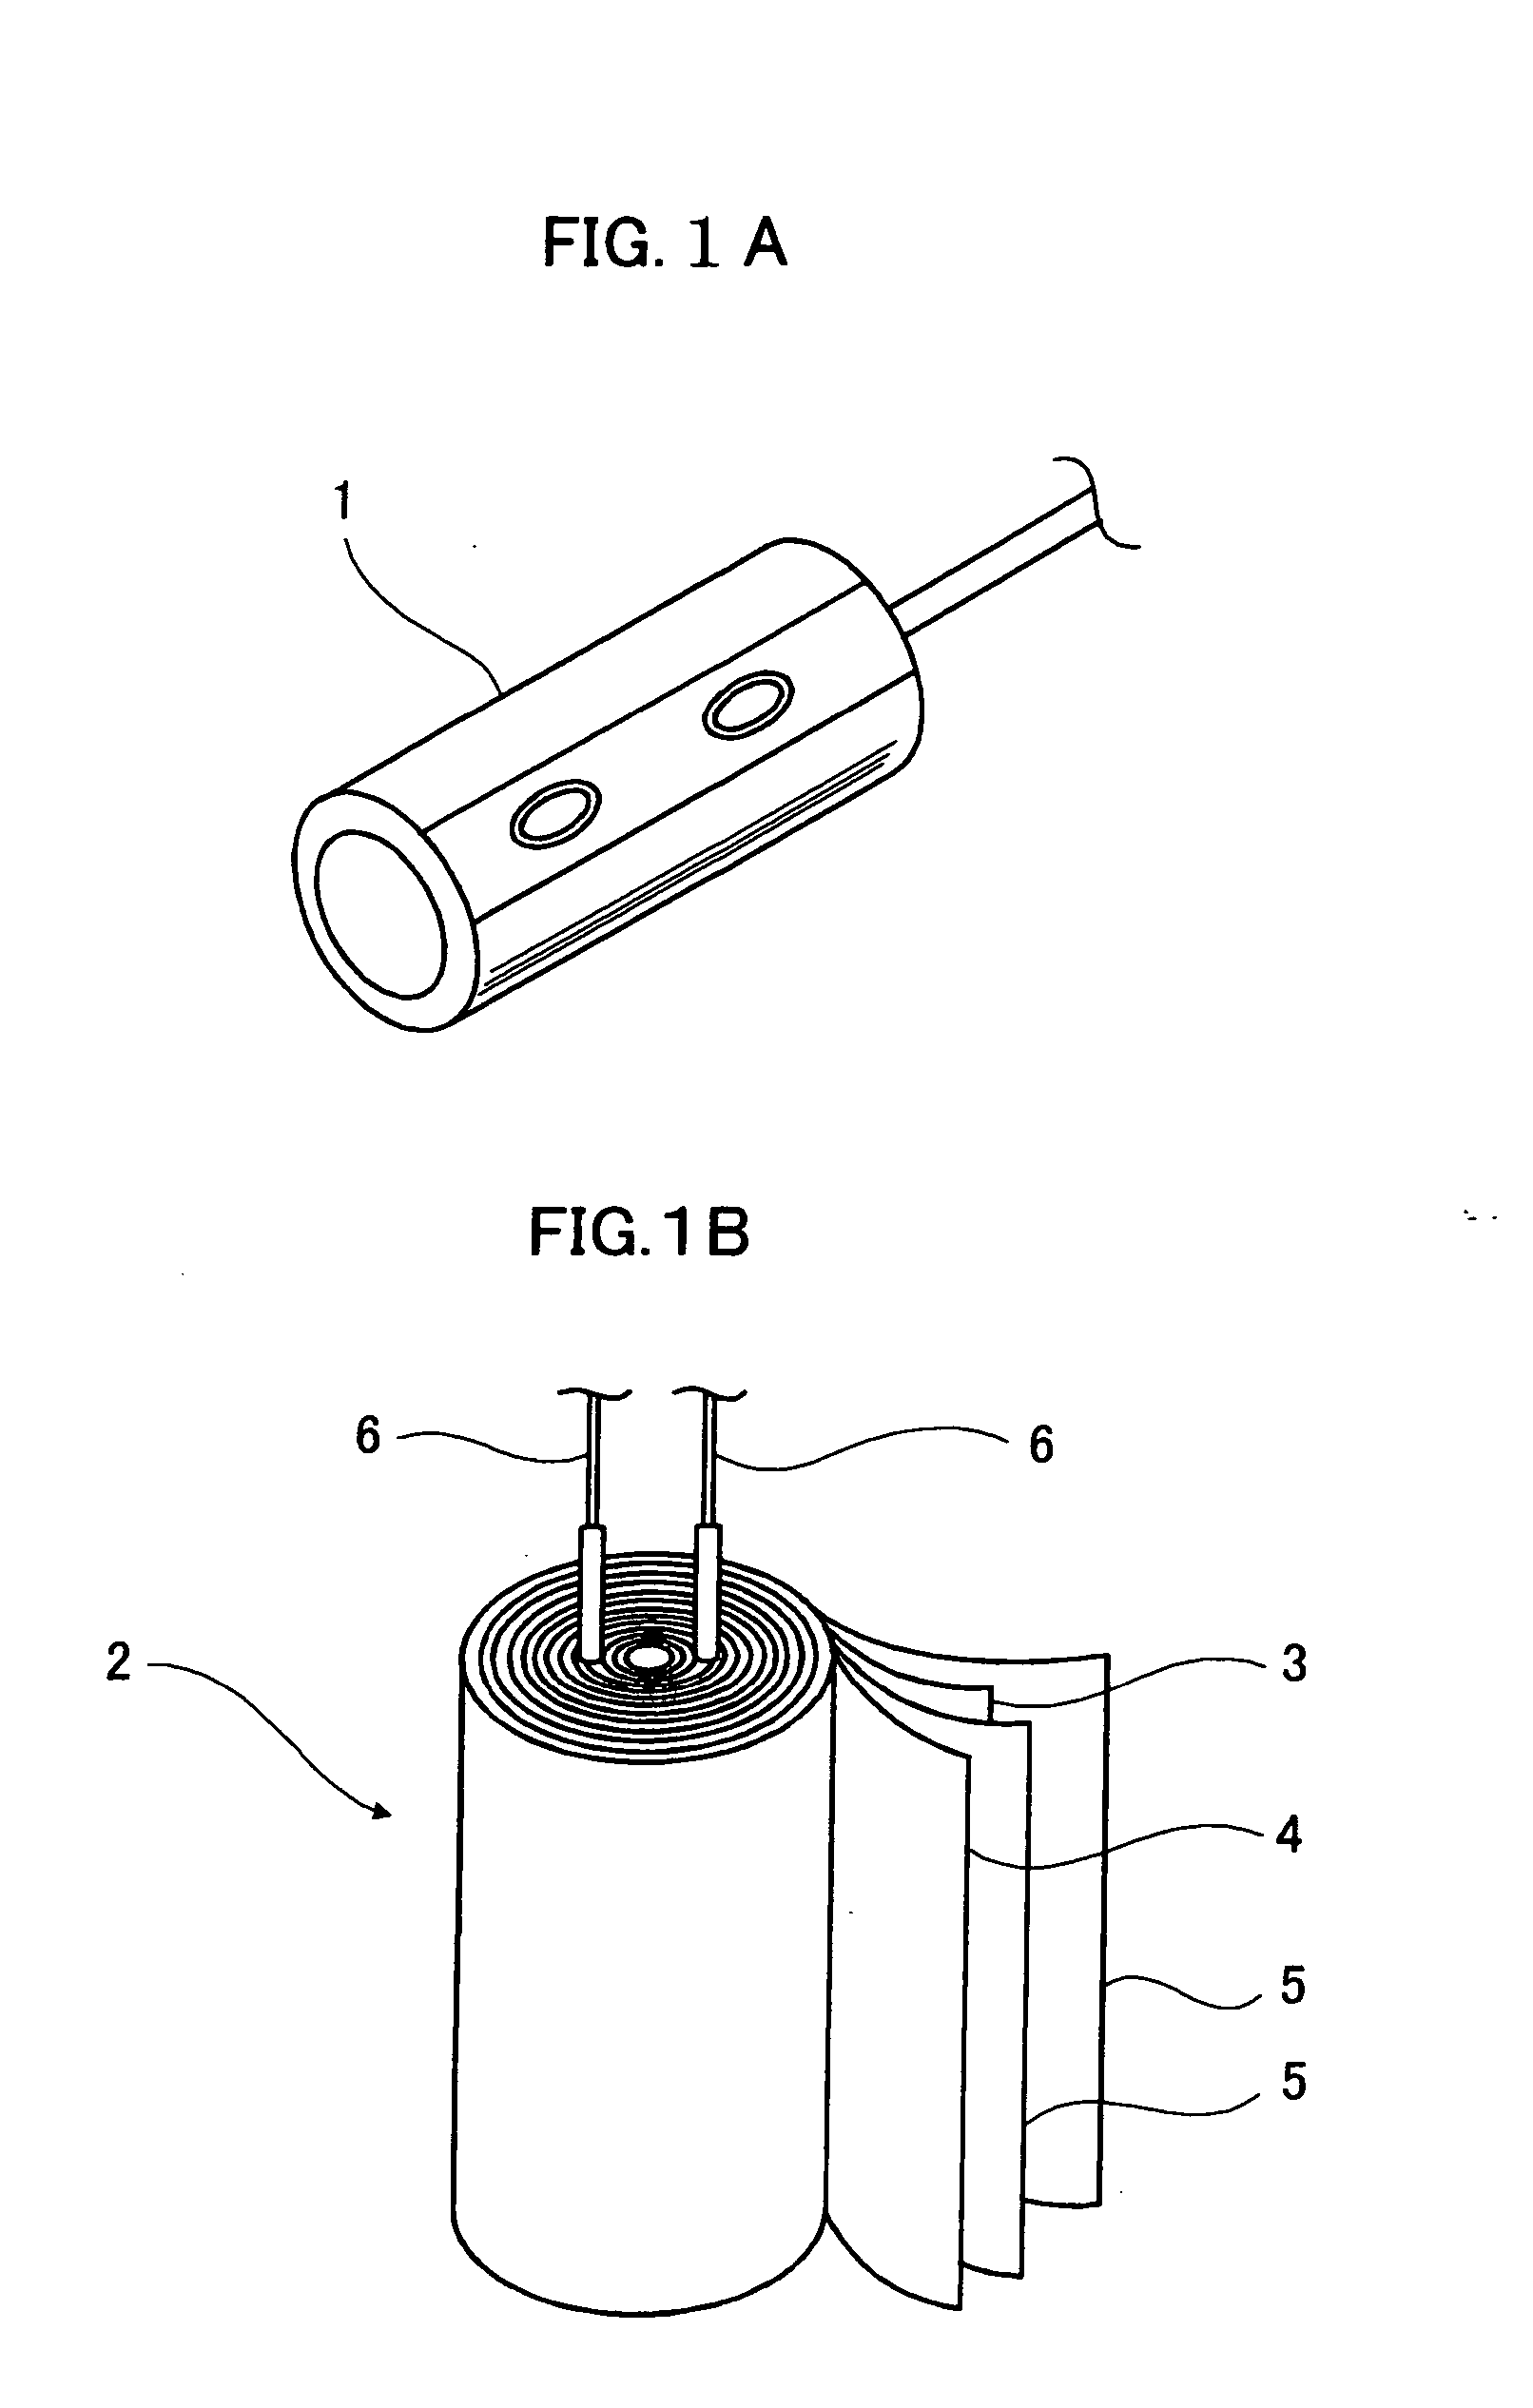 Electrolytic solution for electrochemical element, method of searching for the same, method of producing the same, and electrochemical element